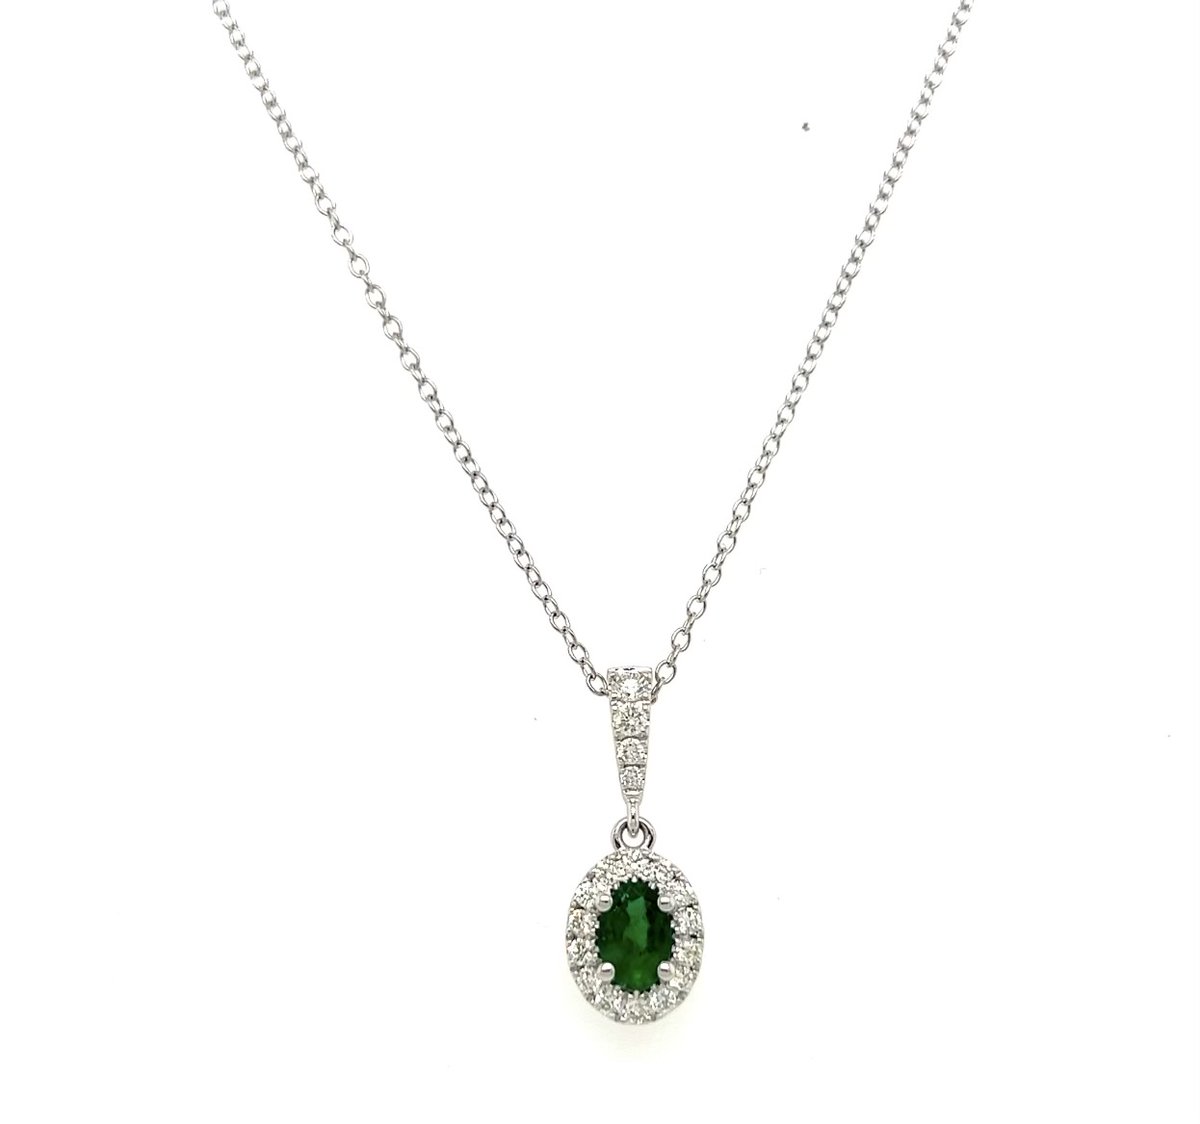 This emerald necklace 💚 is a gorgeous stunner! The perfect May birthstone gift! 

230-01578

#itsaraywardring #diamonds #emerald #loveishere  #ring #necklace #preferredjeweler #thinkrayward #ardmoreok #shoplocal